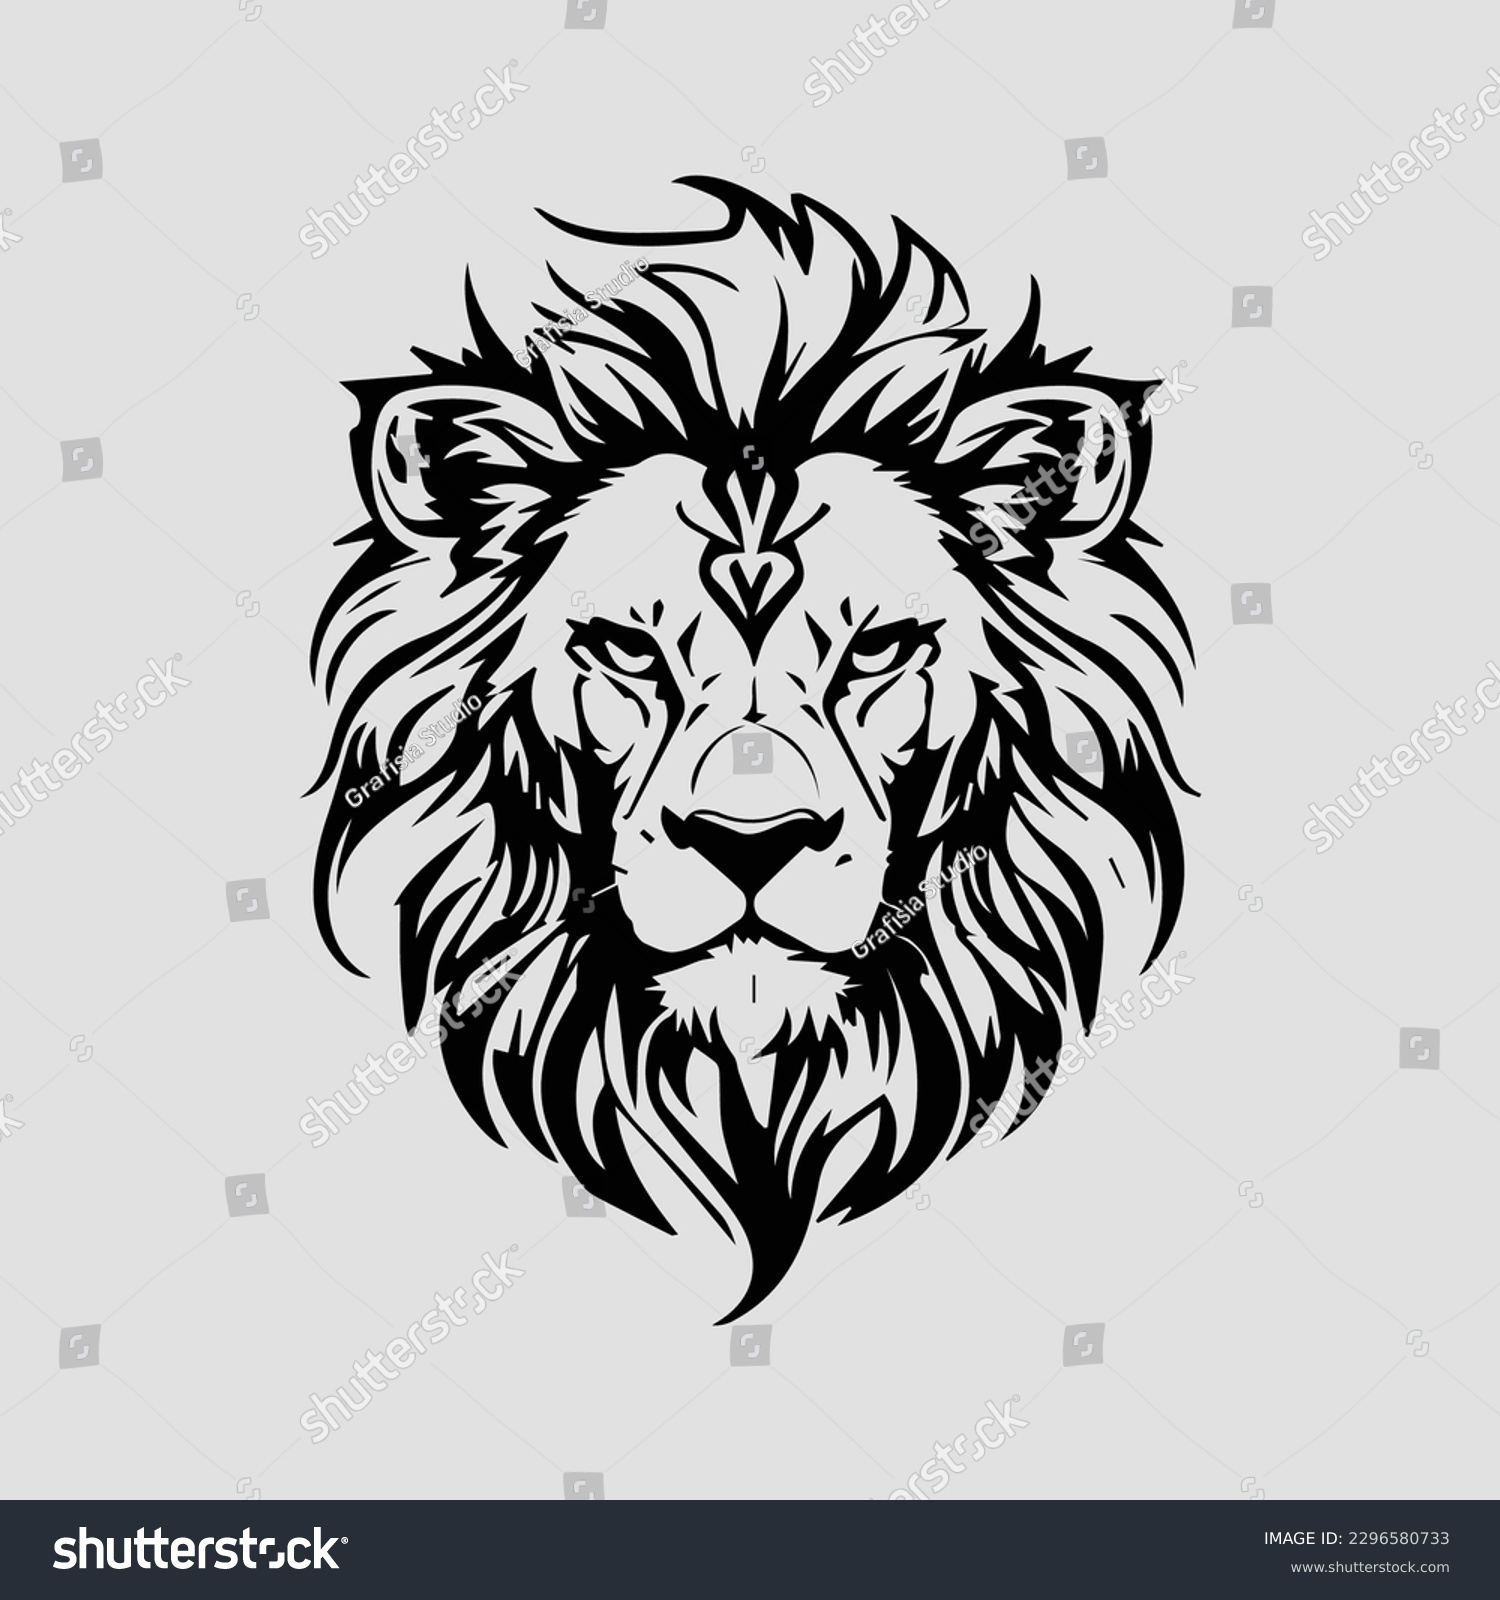 SVG of Lion face vector illustration outline. Coloring book with animal. black and white. white background. ready for print or cutting using EPS or convert to SVG format svg